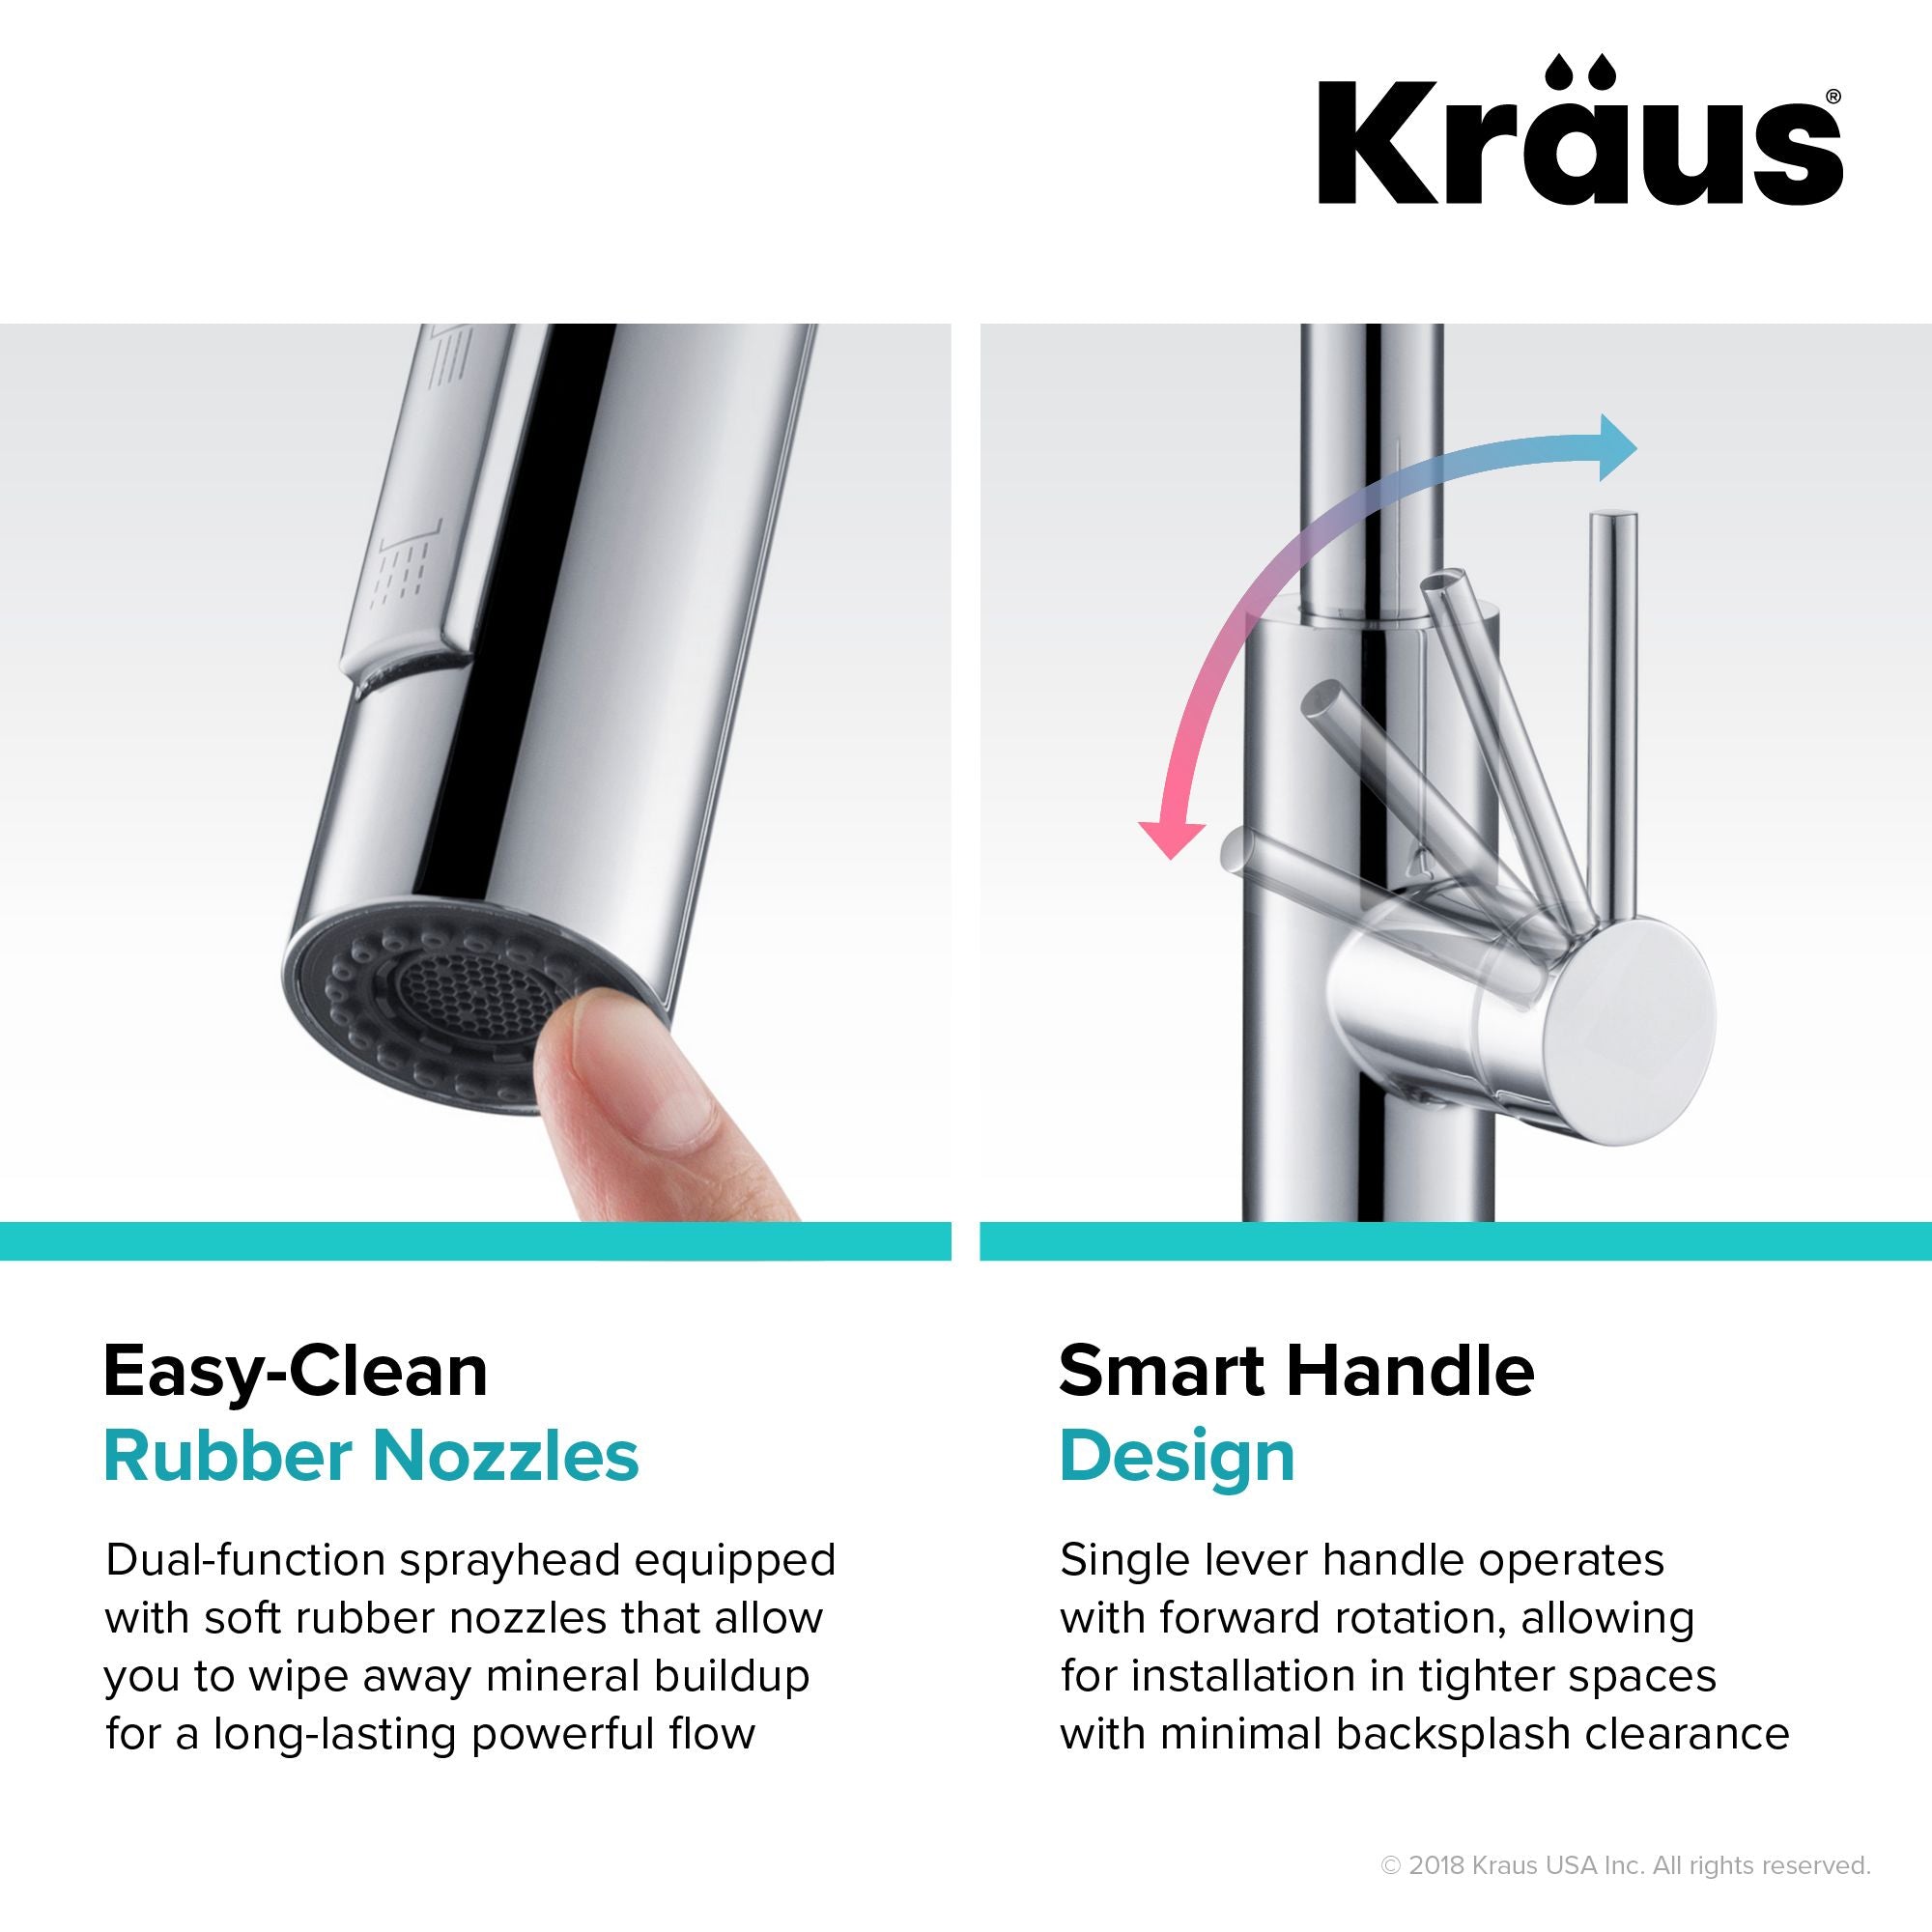 KRAUS Oletto Single Lever Pull Down Kitchen Faucet in Chrome KPF-2620CH | DirectSinks